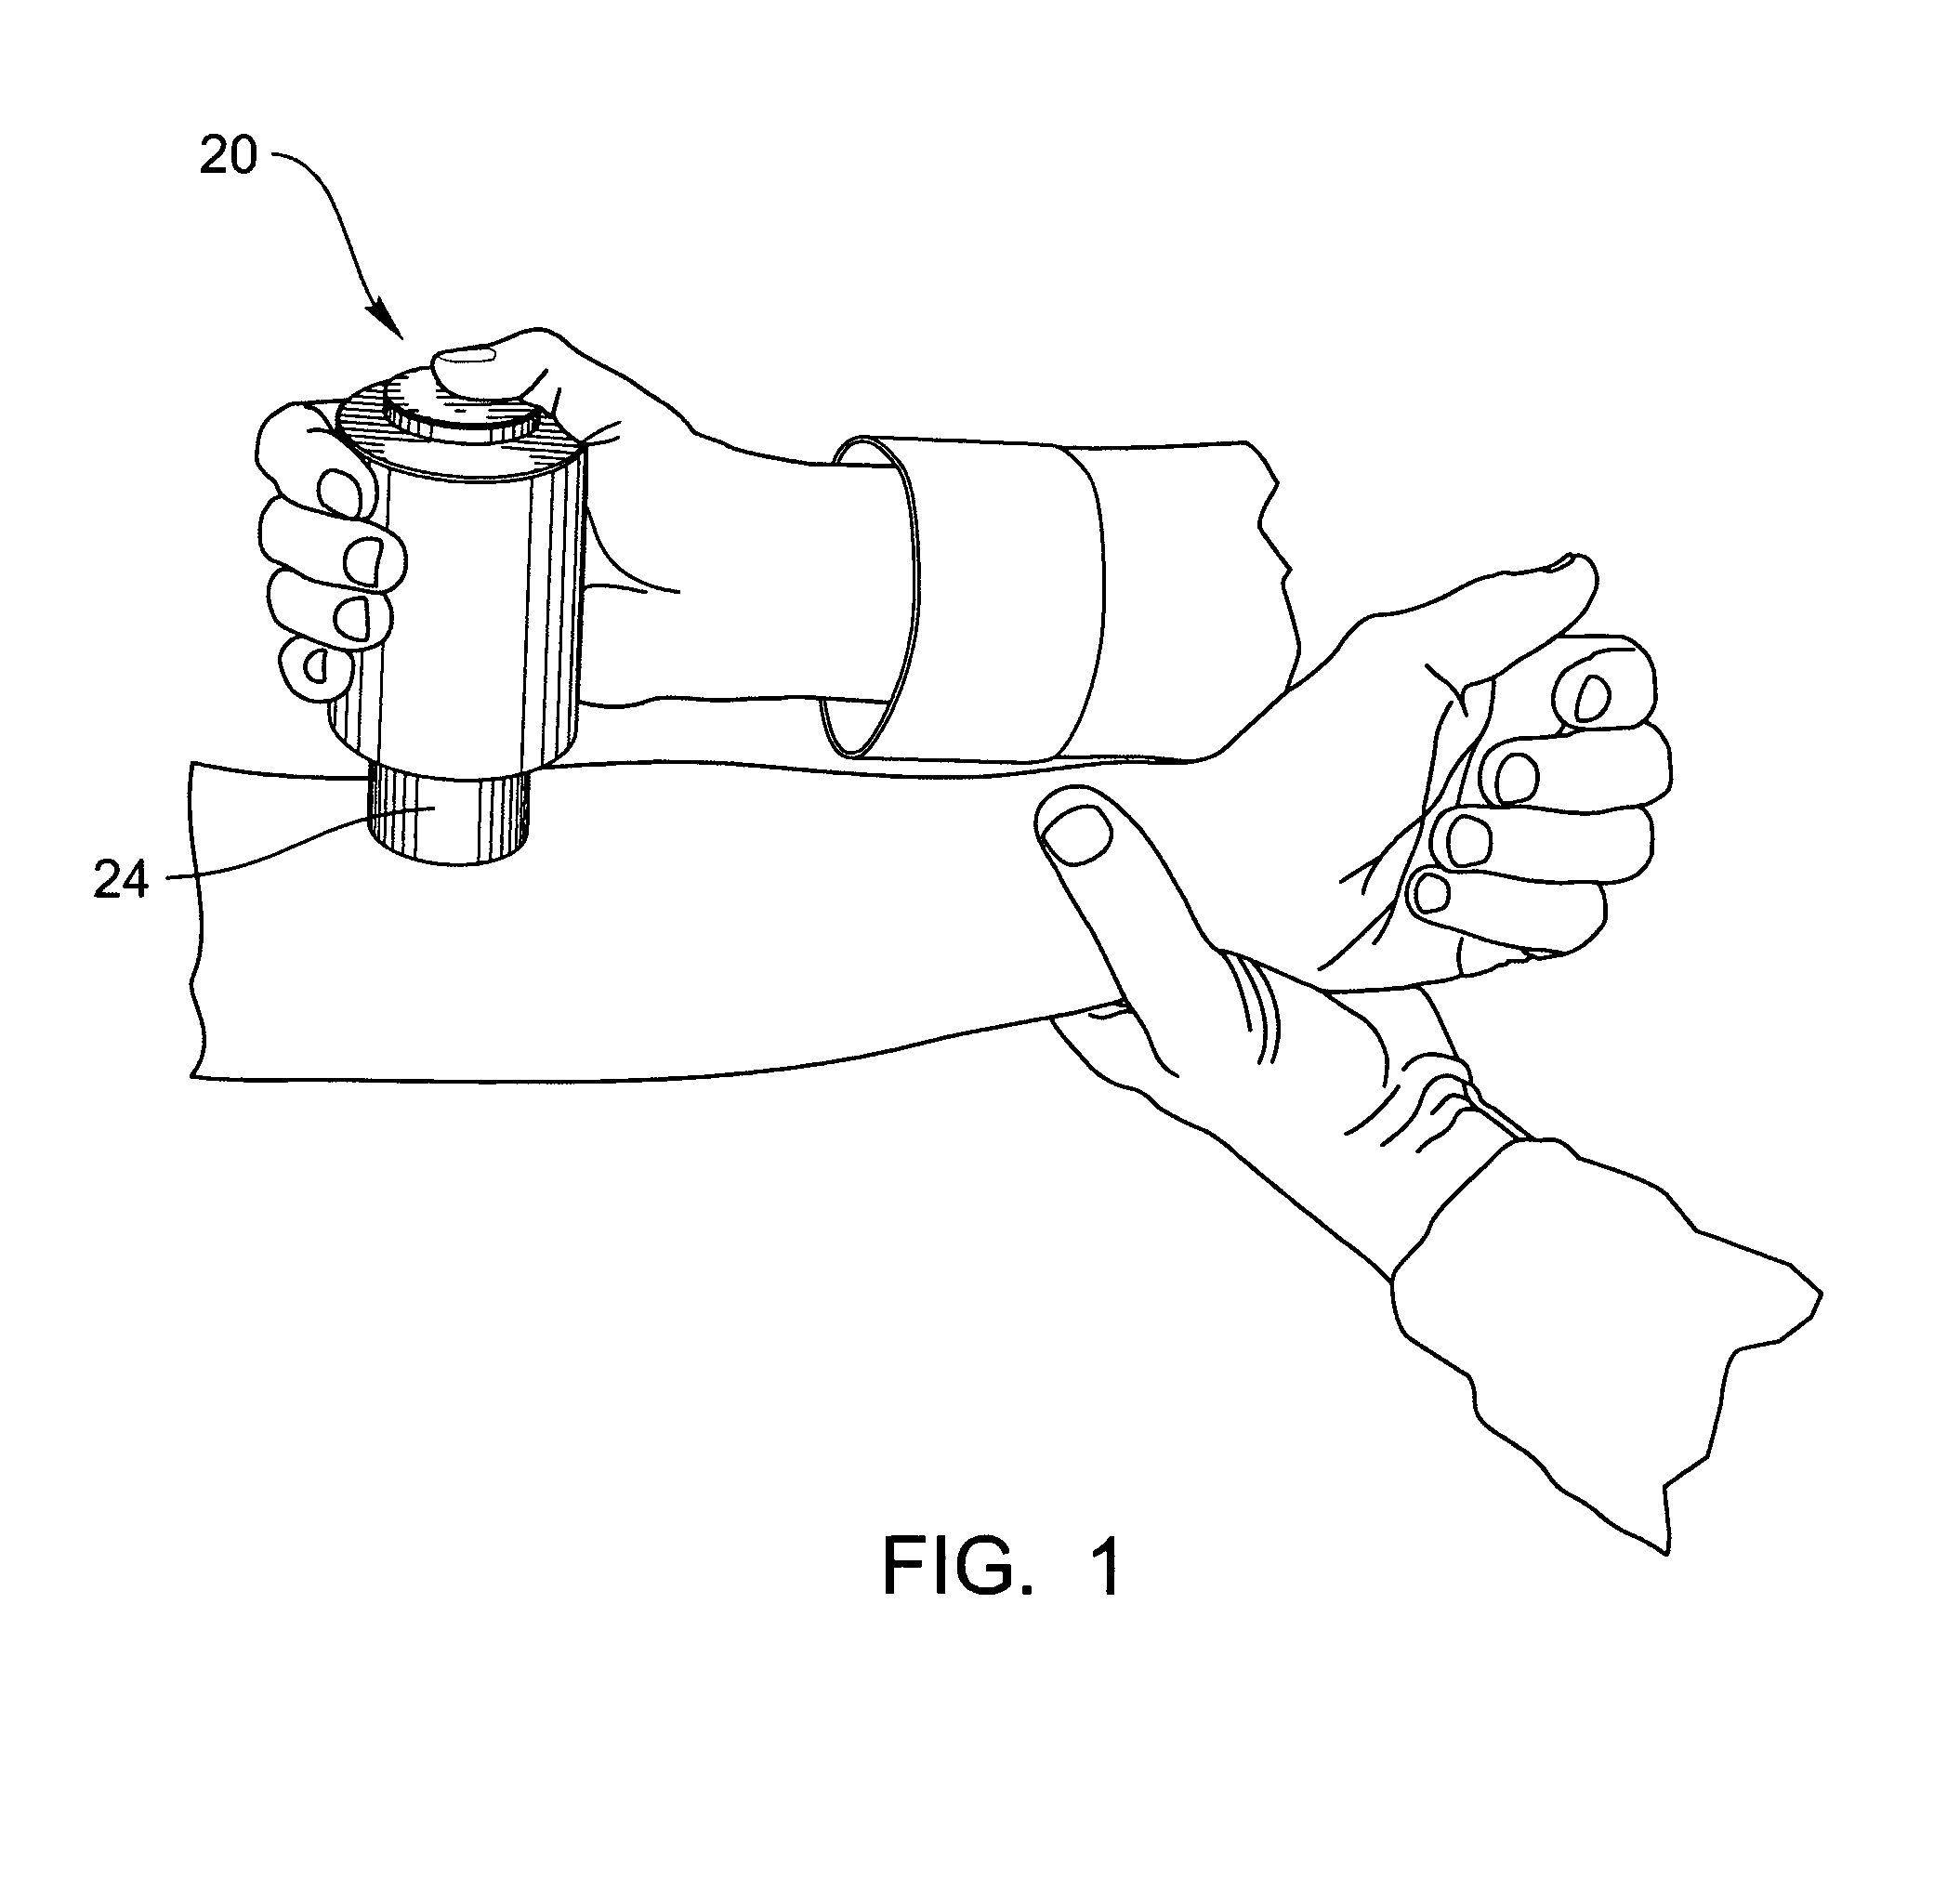 Method and apparatus for detecting structures of interest